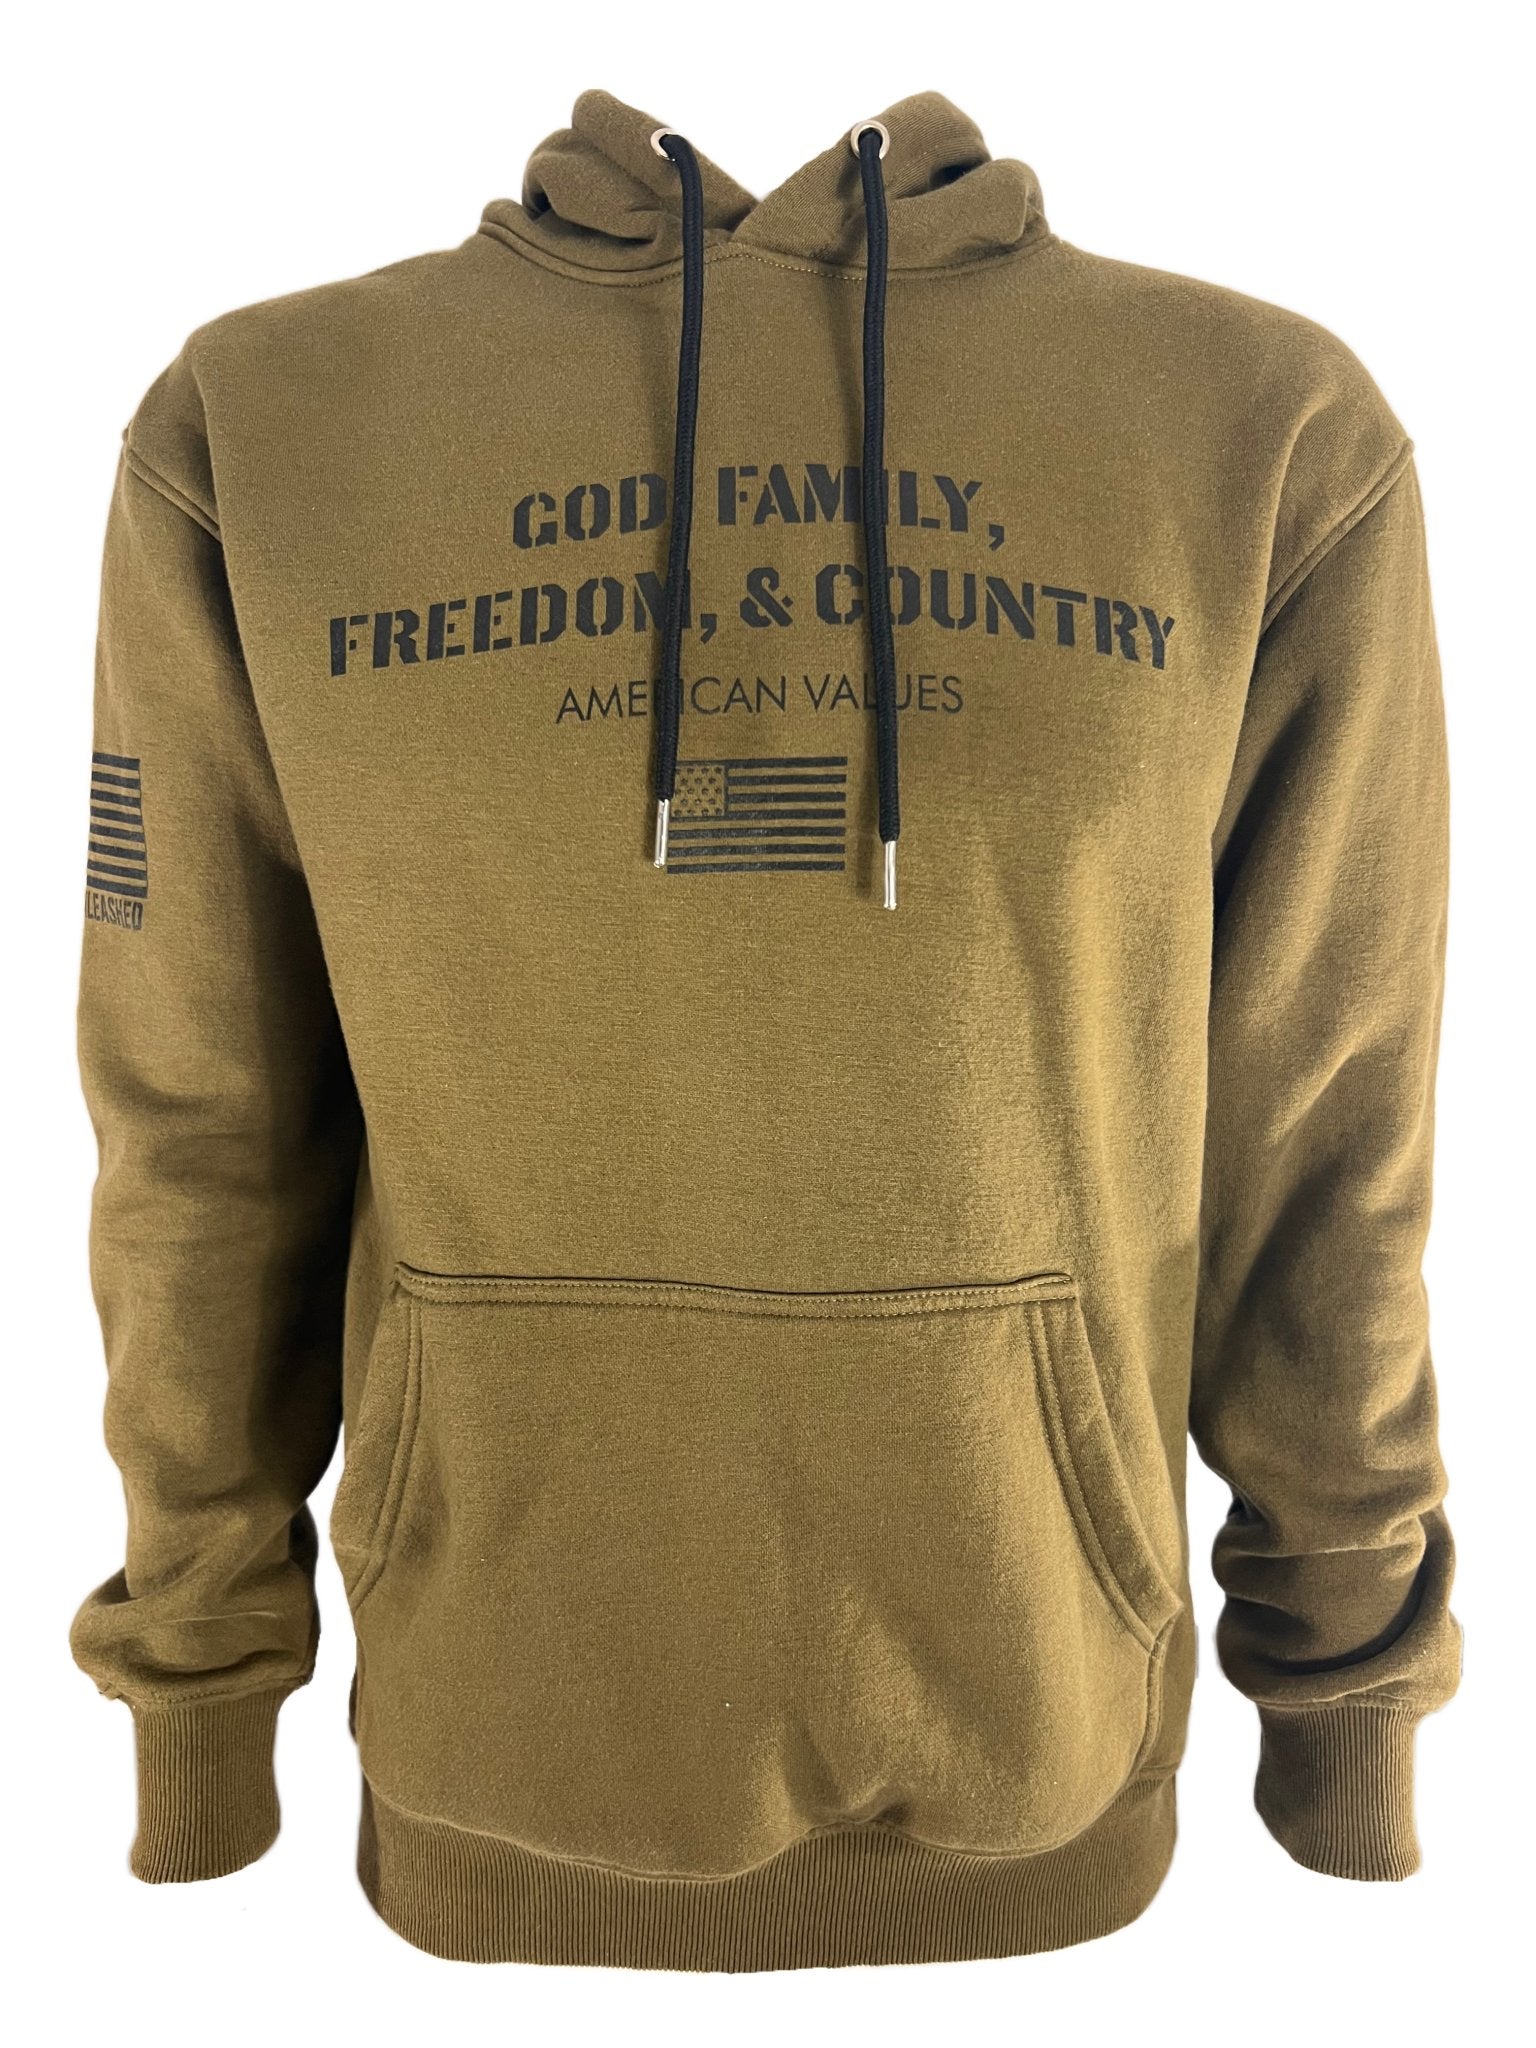 MEN’S AMERICAN VALUES HOODIE |GOD FAMILY FREEDOM & COUNTRY HOODIE - MILITARY GREEN | ALPHAUNLEASHED - ALPHAunleashed